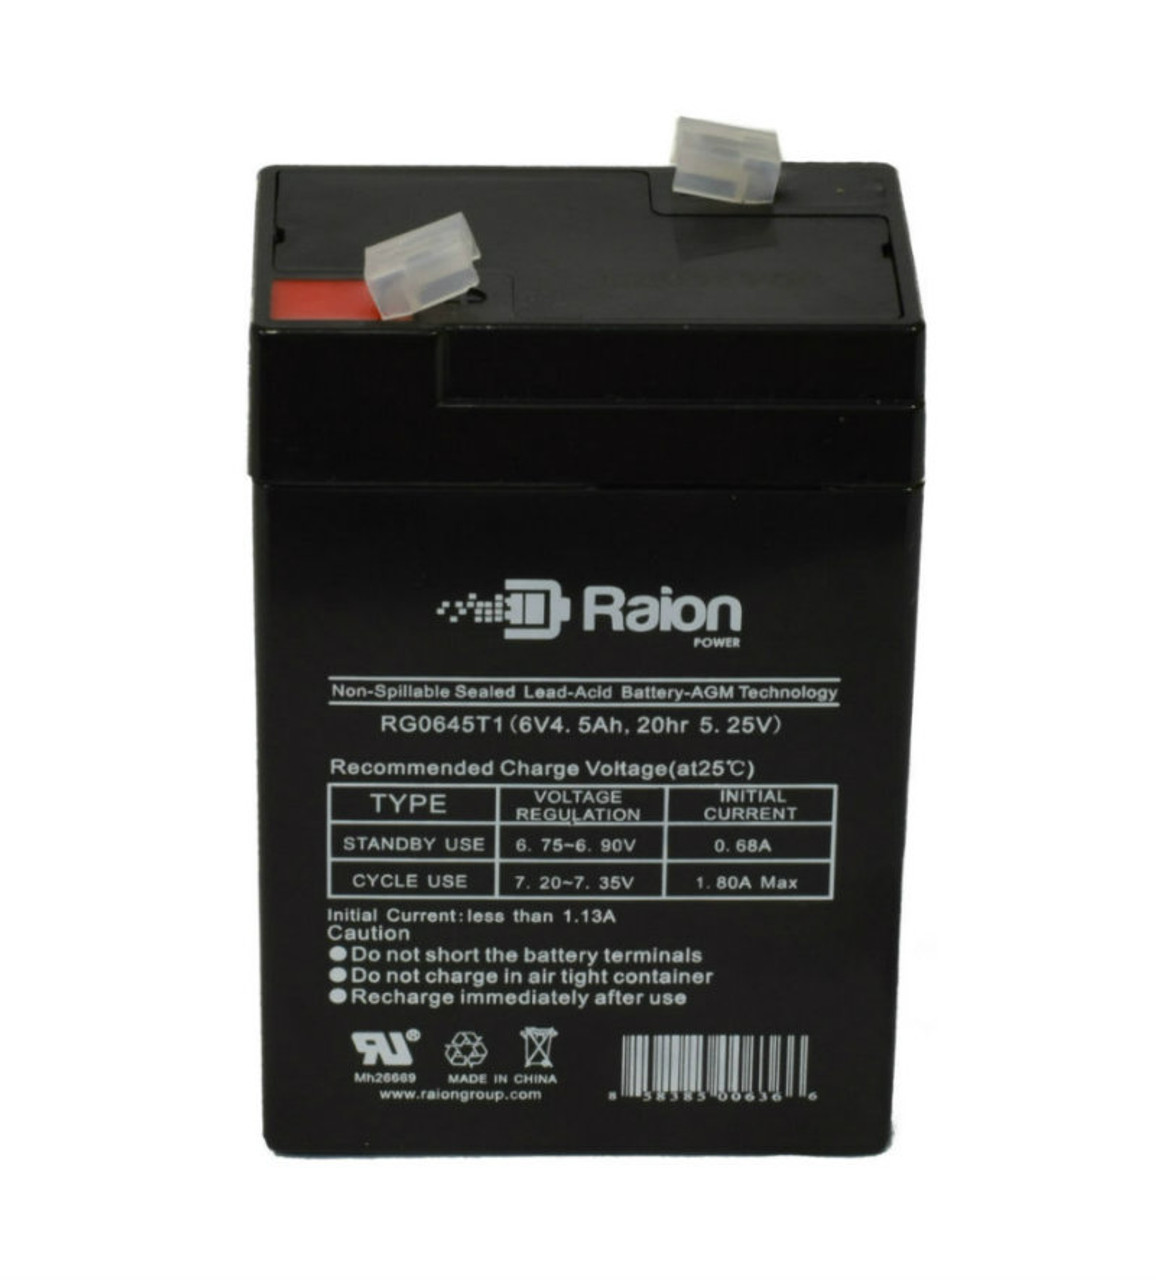 Raion Power RG0645T1 Replacement Battery Cartridge for Dual-Lite HCXURB